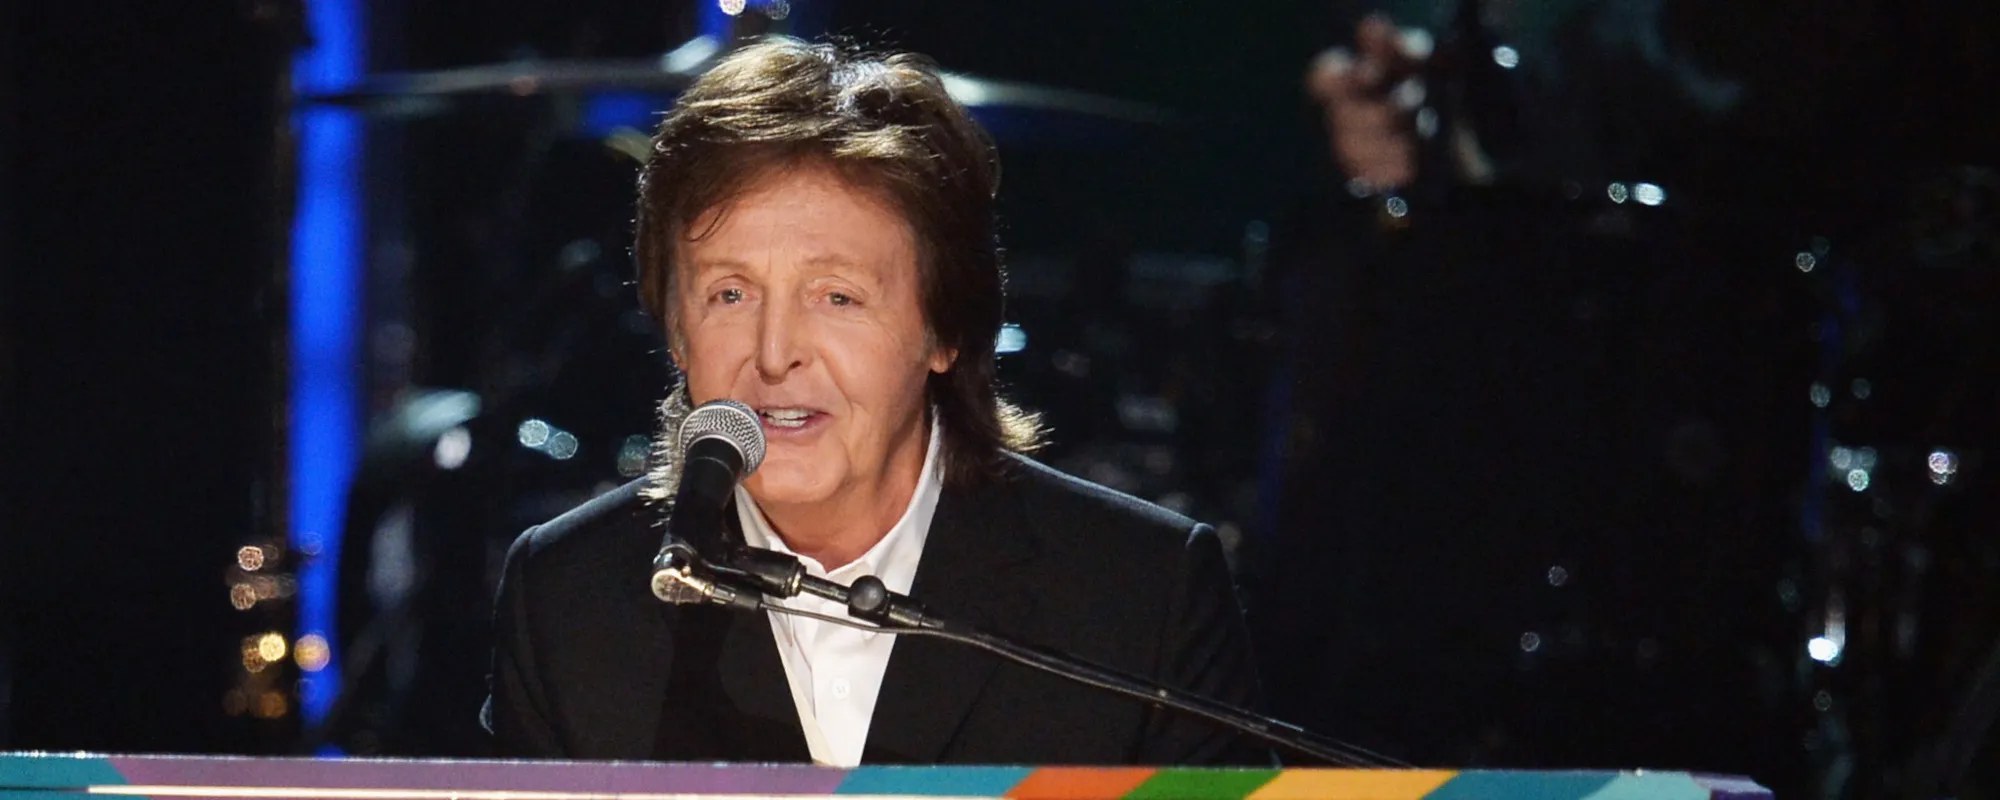 Remember When: Paul McCartney and Stevie Wonder Topped the Charts with “Ebony and Ivory”